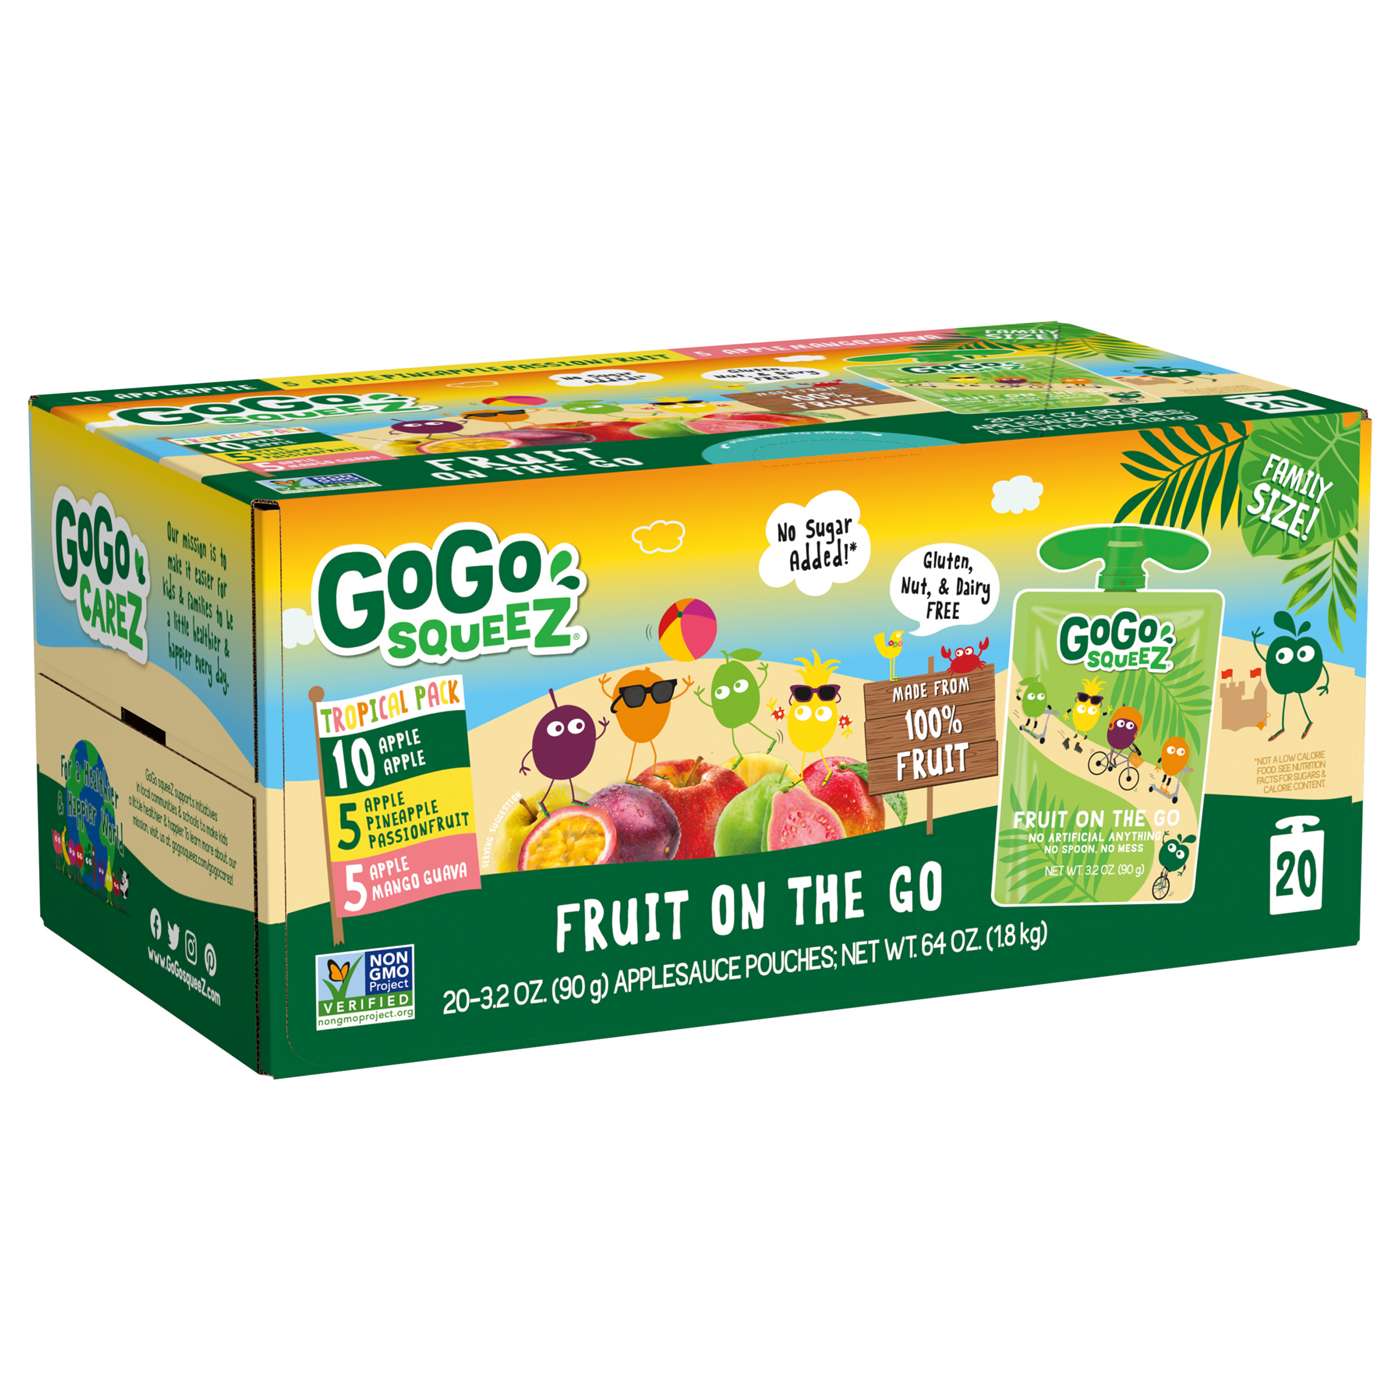 GoGo squeeZ Tropical Fruit on the Go Variety Pack; image 2 of 3